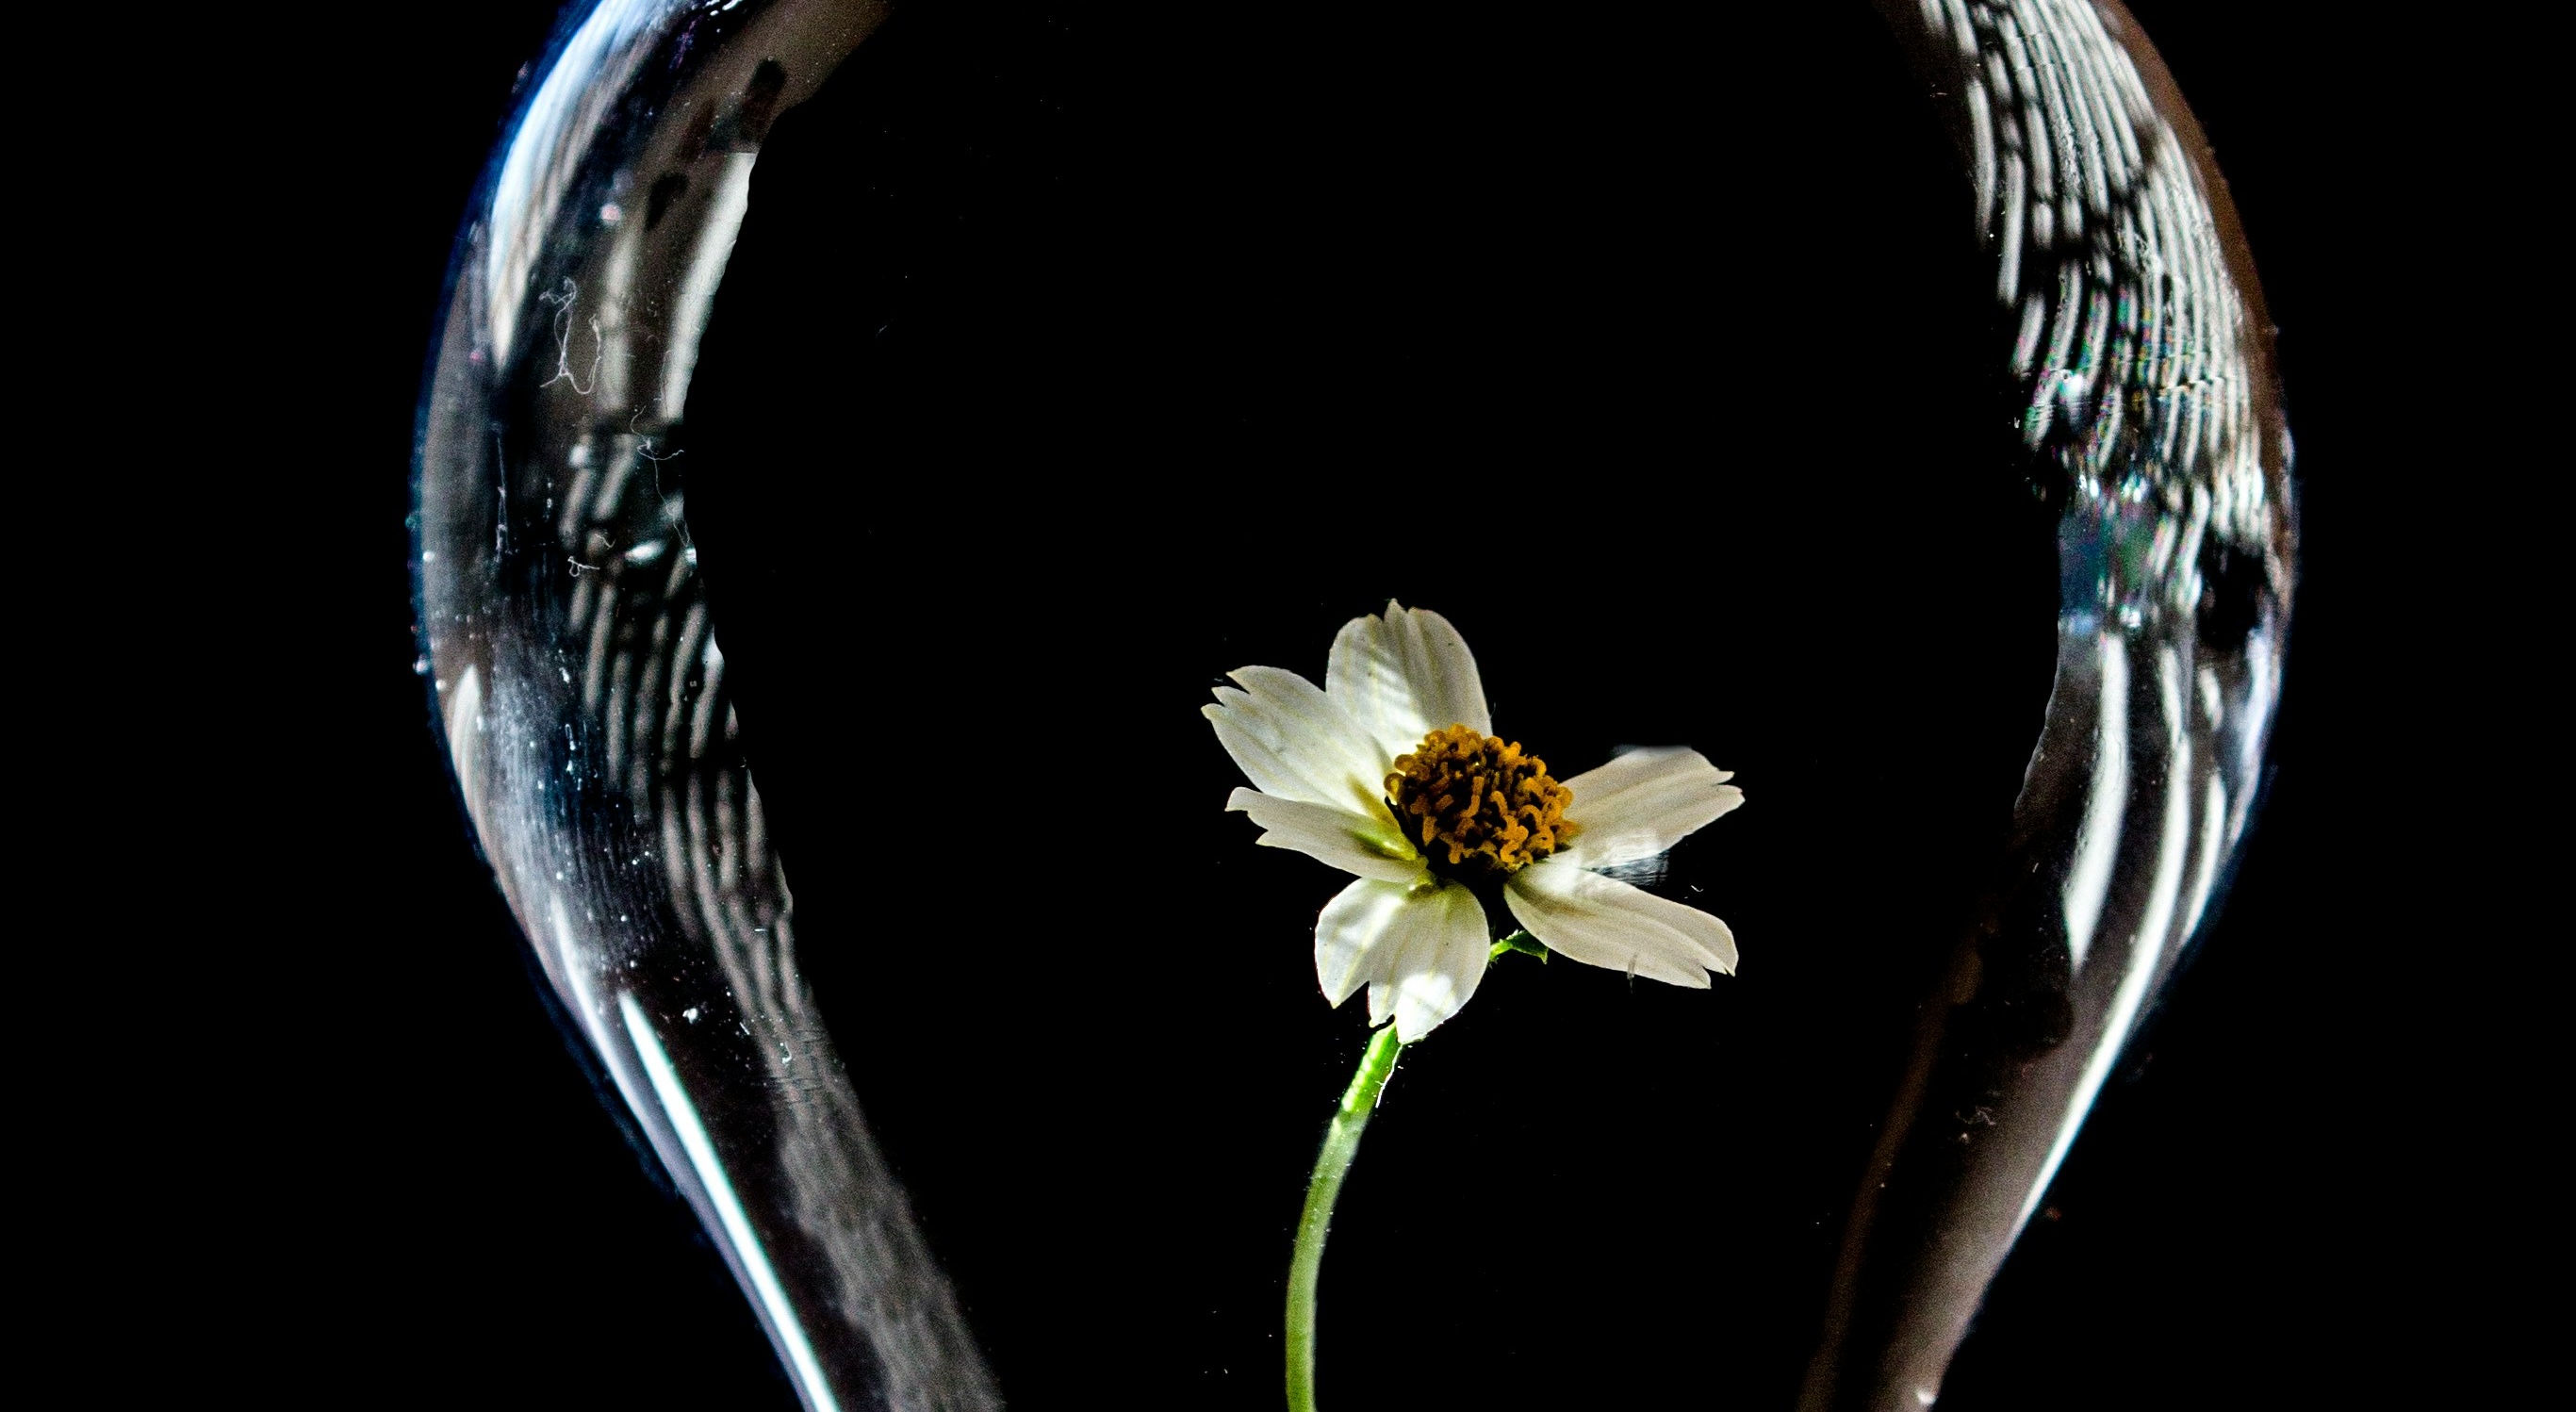 A photo of a lightbulb with a flower growing inside against a black background.